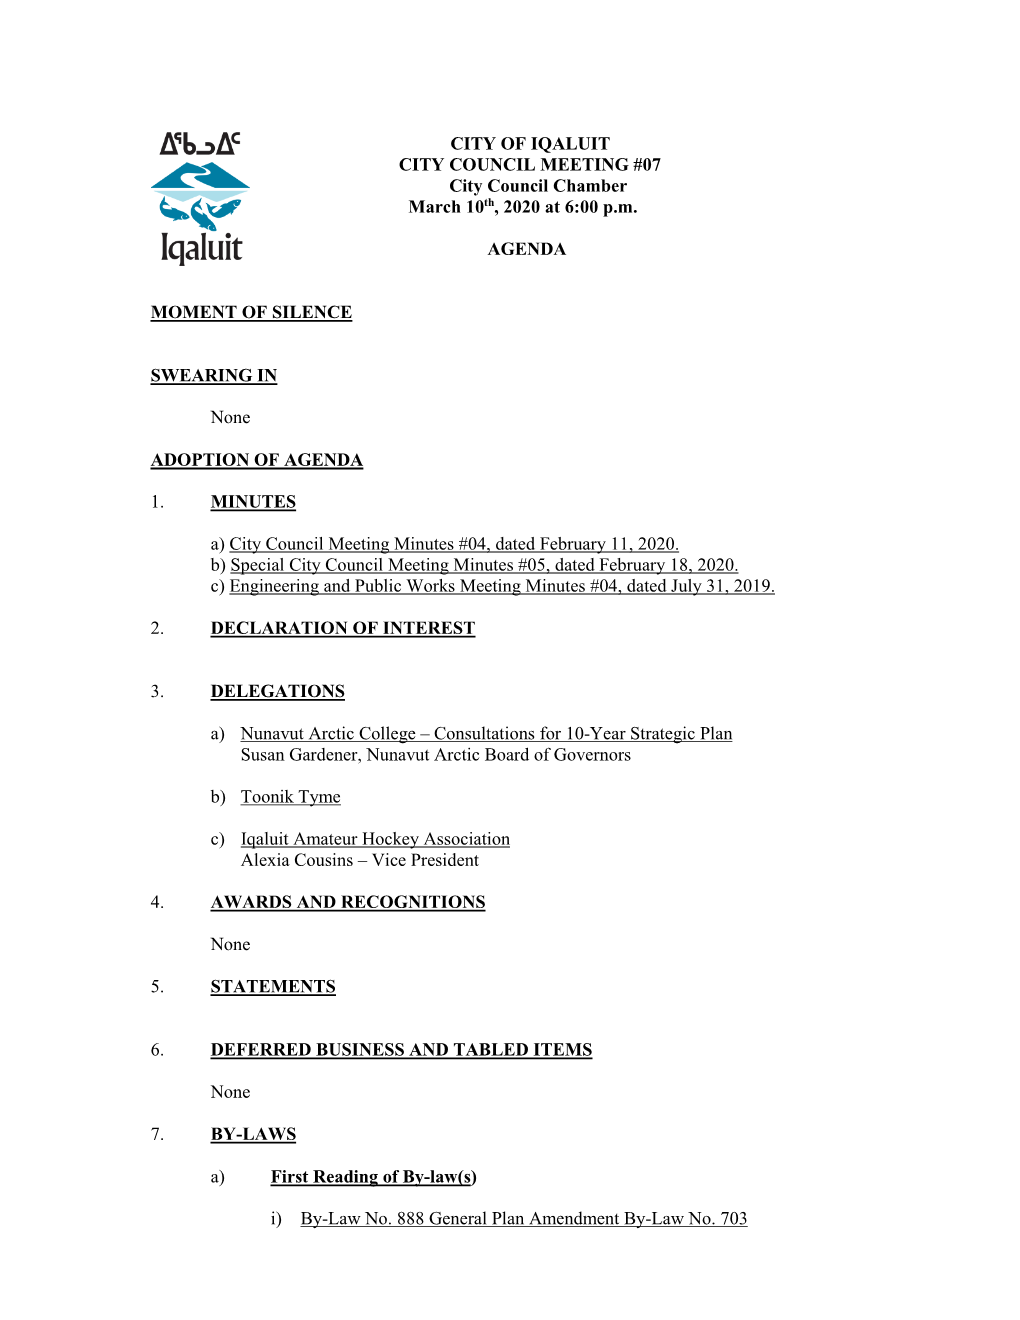 CITY of IQALUIT CITY COUNCIL MEETING #07 City Council Chamber March 10Th, 2020 at 6:00 P.M